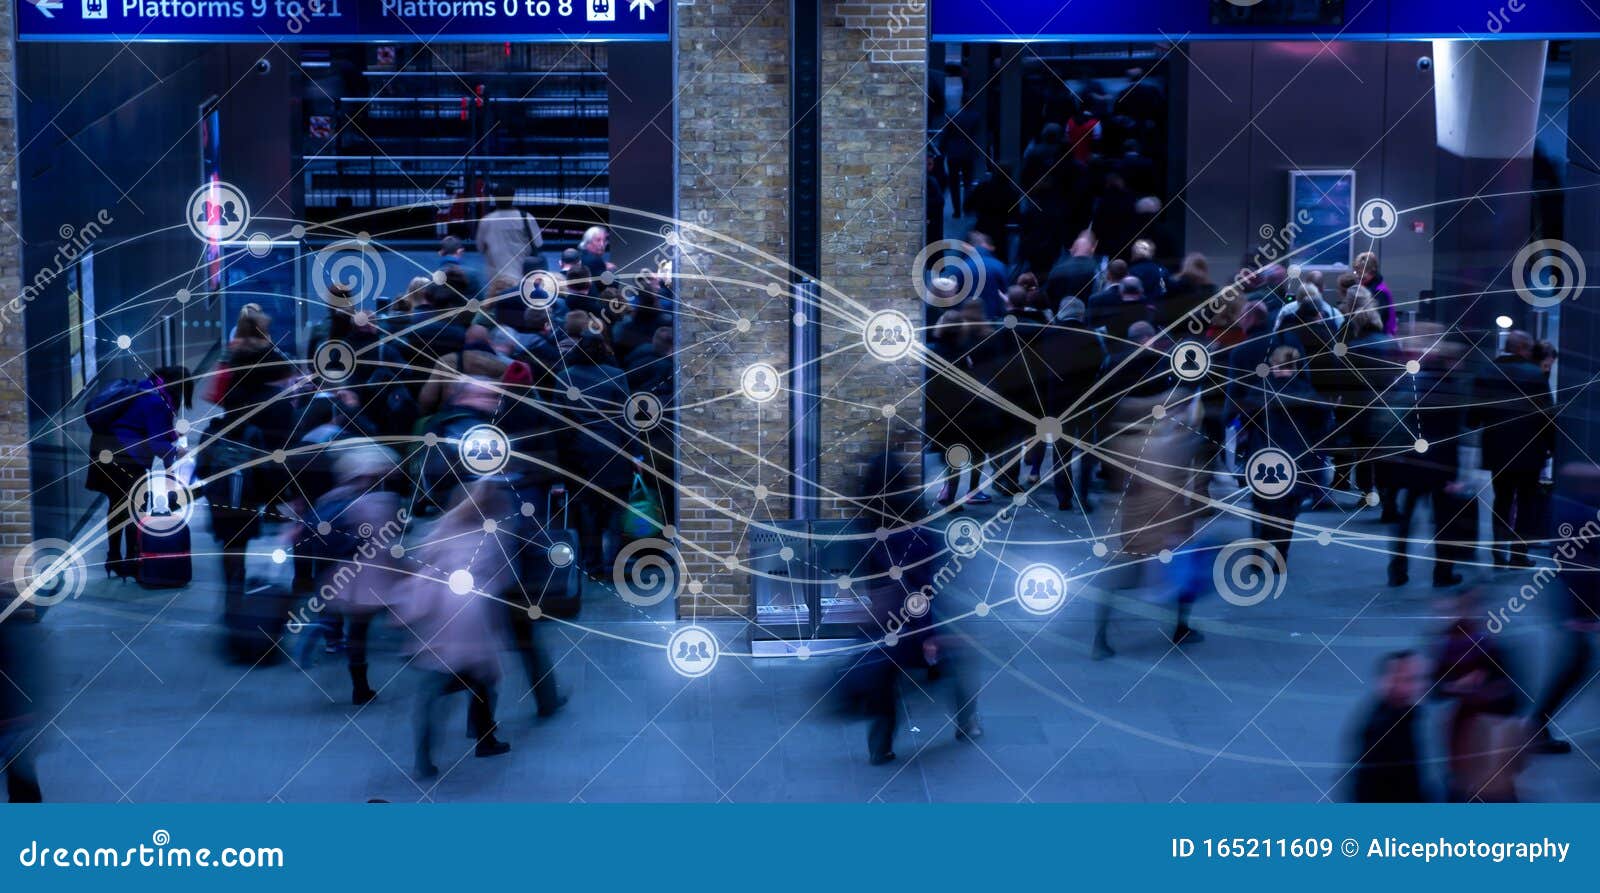 movement of people in london as network & hr concept